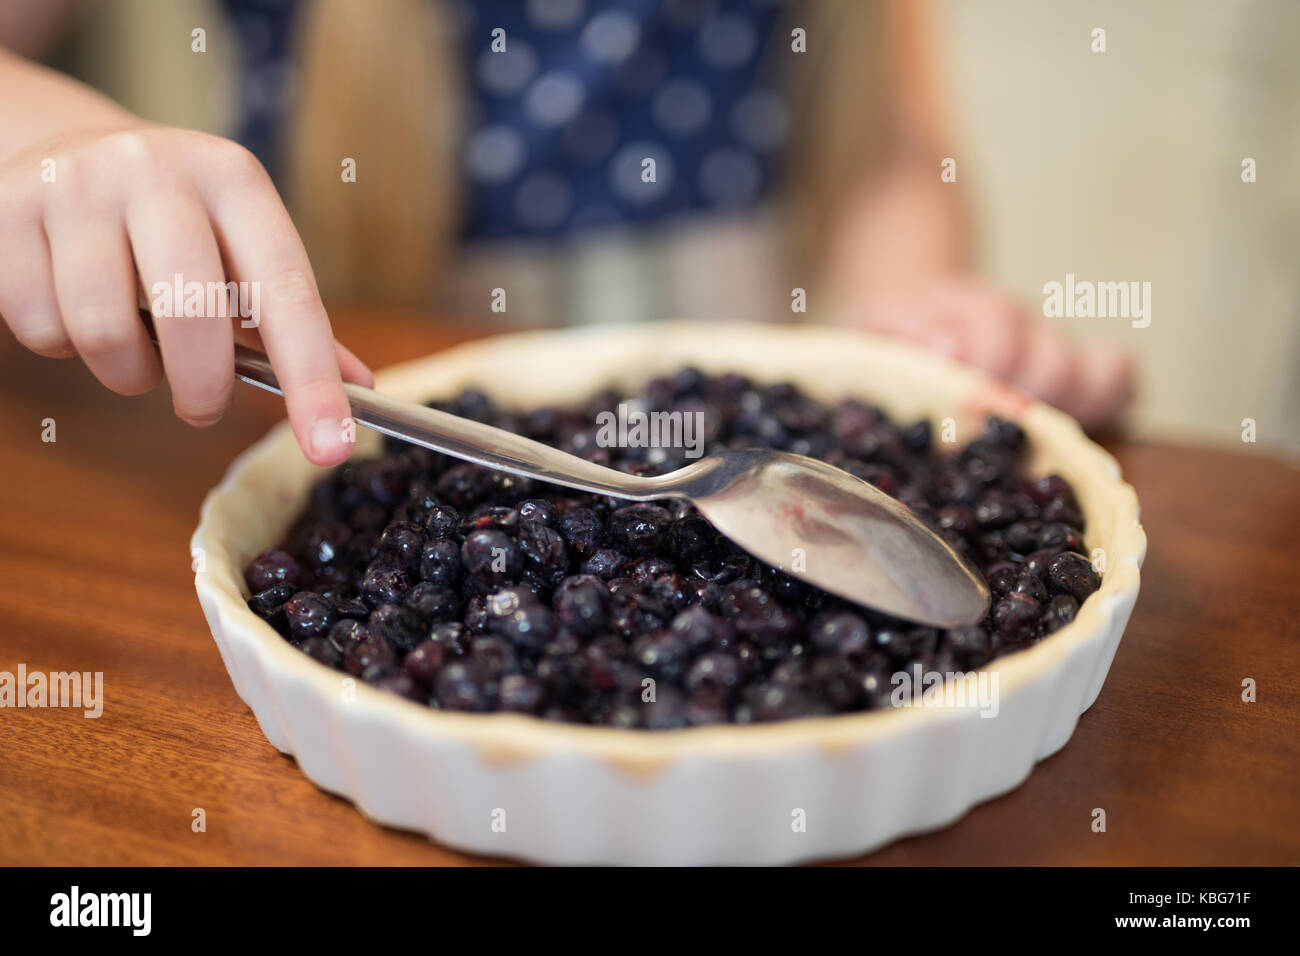 Mid-section of young girl preparing blue berry pie Stock Photo